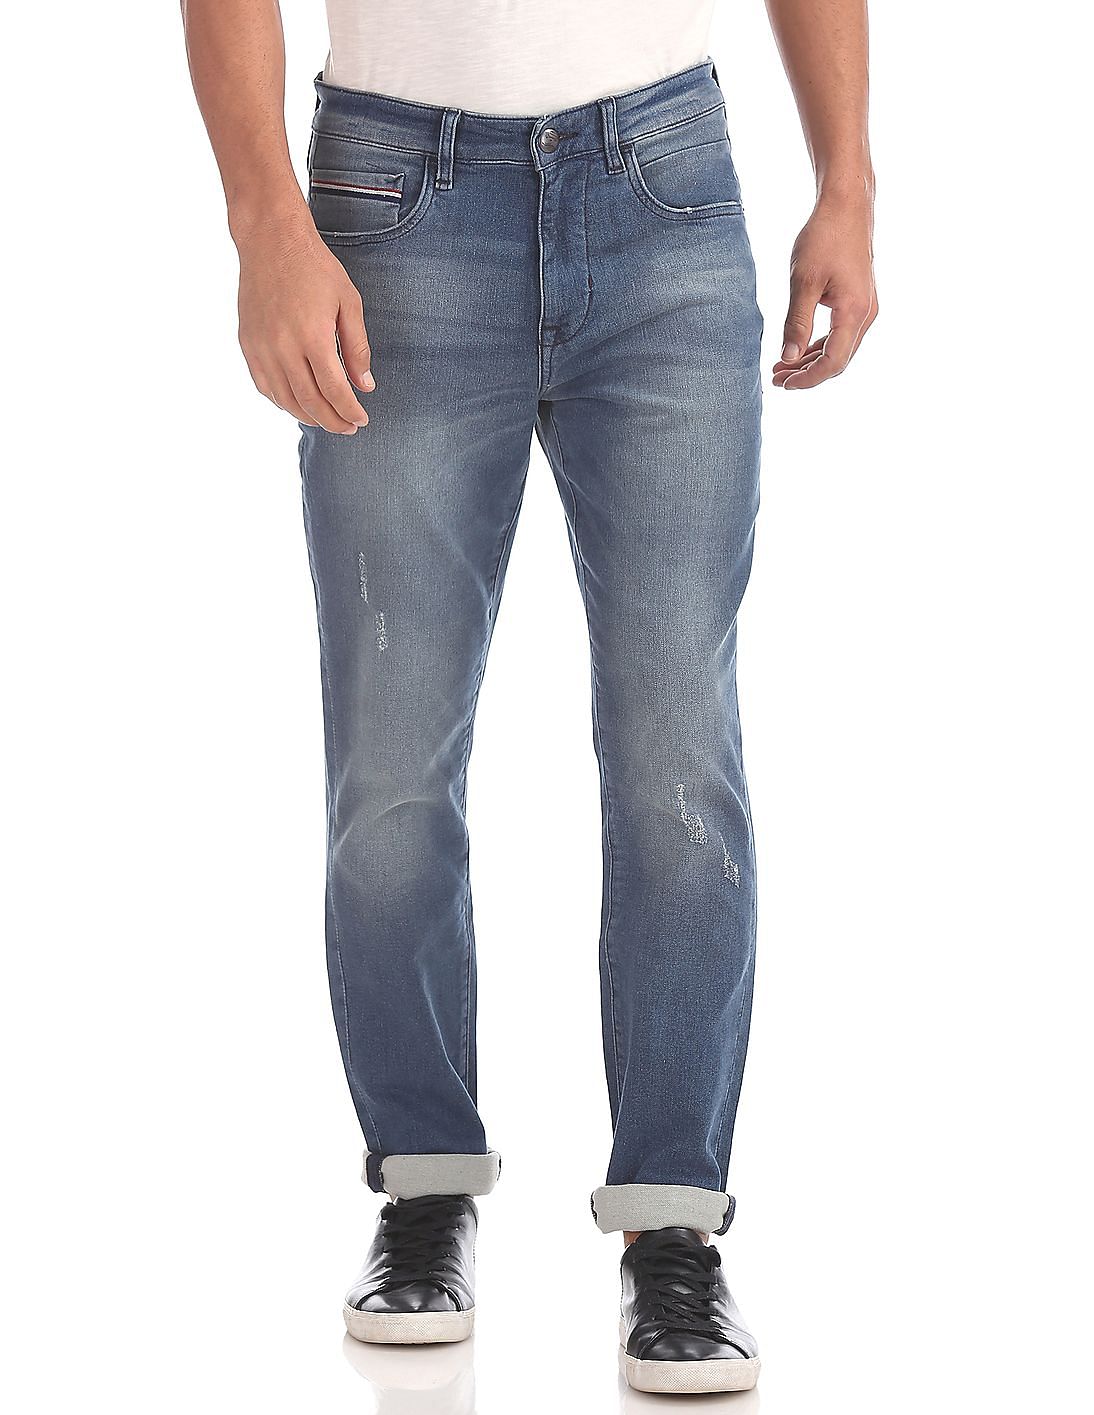 Buy Men Slim Fit Distressed Jeans online at NNNOW.com